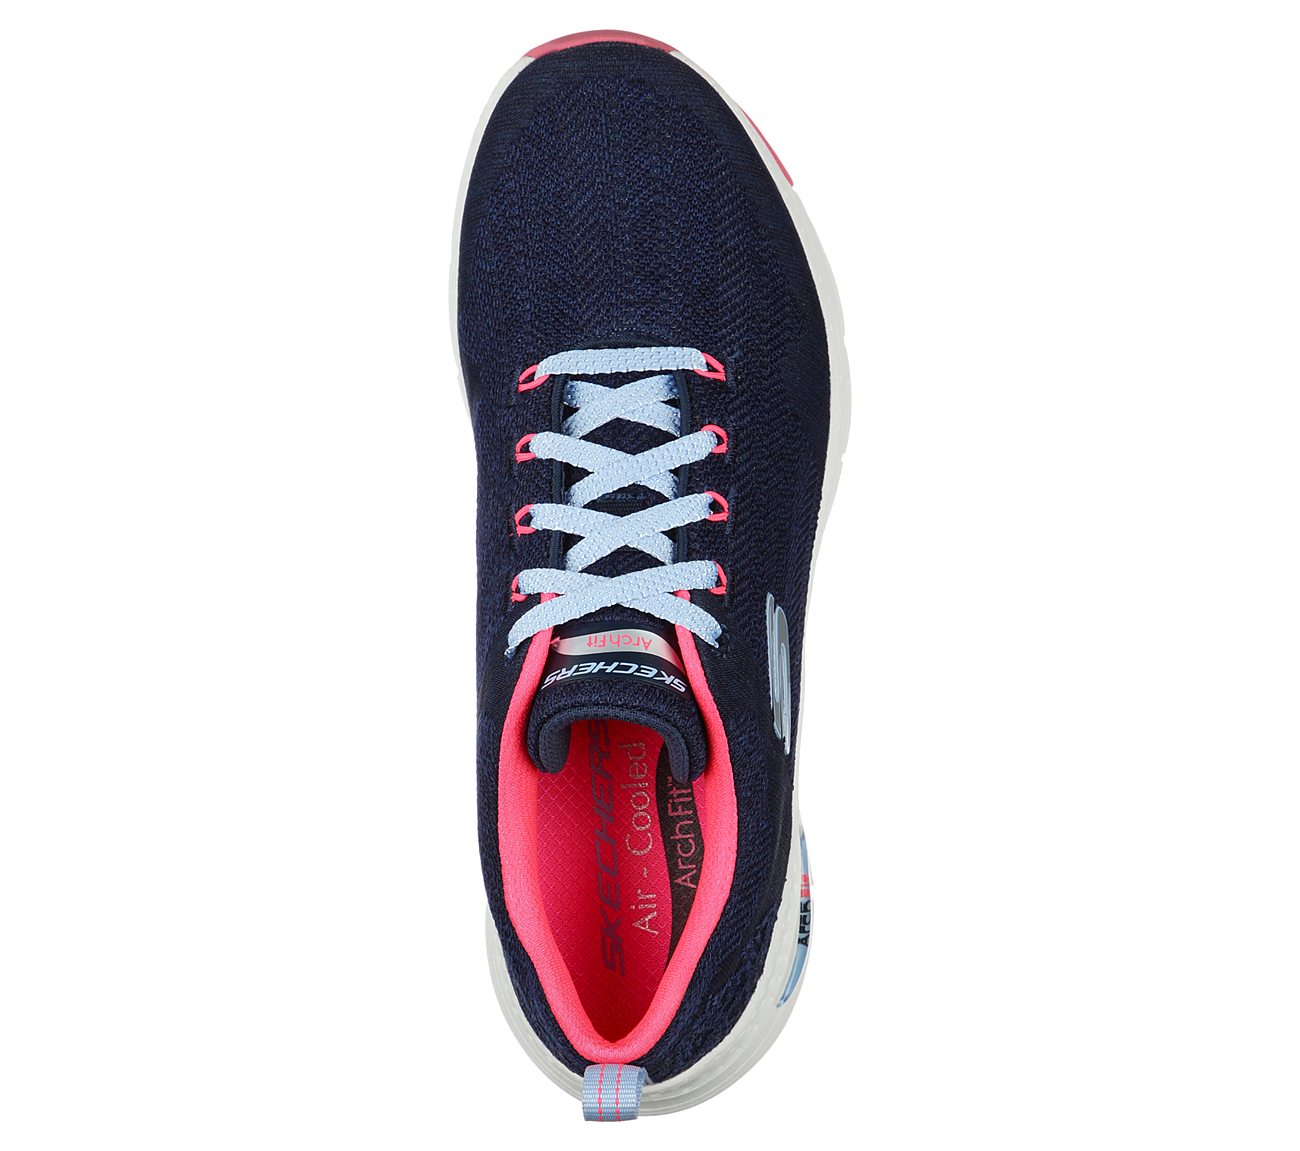 ARCH FIT-COMFY WAVE, NAVY/HOT PINK Footwear Top View